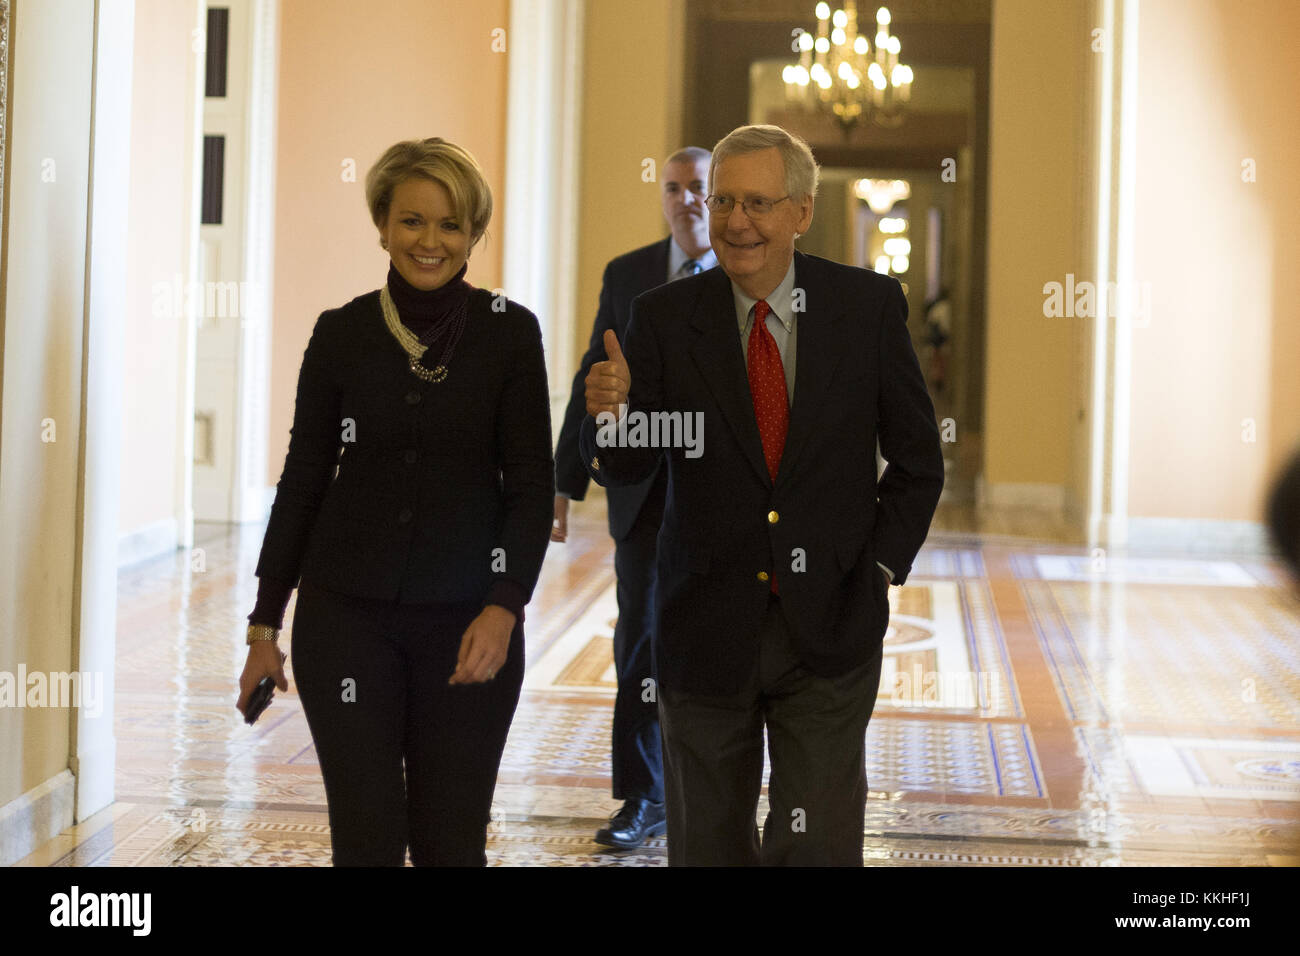 Washington, District of Columbia, USA. 1st Dec, 2017. United States Senate Majority Leader Mitch McConnell (Republican of Kentucky) gives a thumbs up as he walks with a staffer from his office to the Senate chamber for a procedural vote to move forward with voting on the Republican proposed tax reform bill at the United States Capitol in Washington, DC on Friday, December 1, 2017.Credit: Alex Edelman/CNP Credit: Alex Edelman/CNP/ZUMA Wire/Alamy Live News Stock Photo